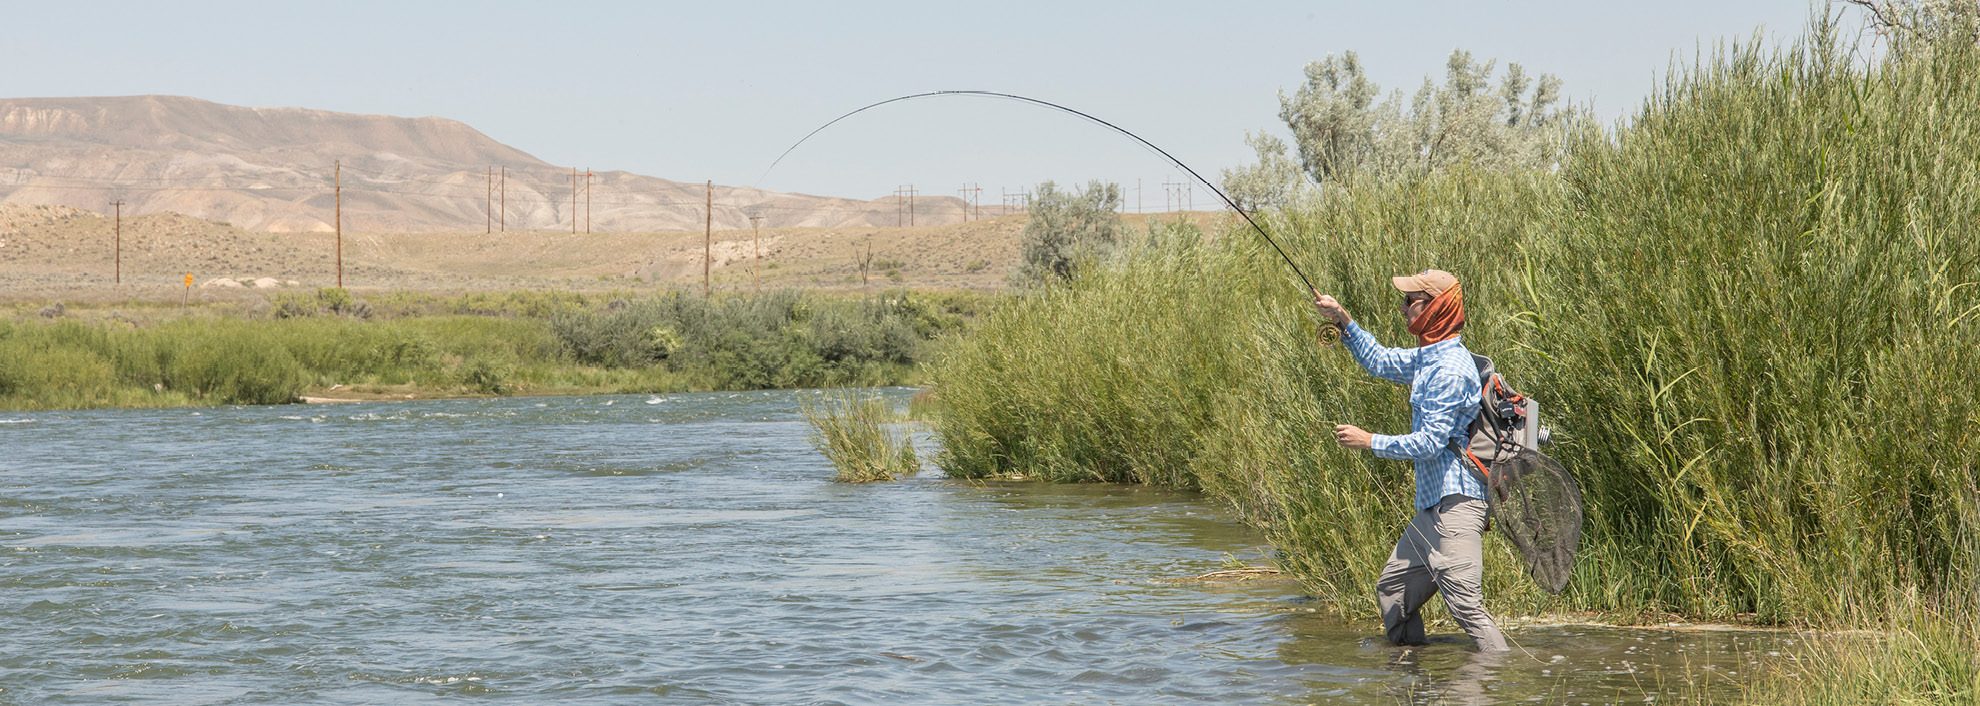 Man fly fishing in river with mountain in the background